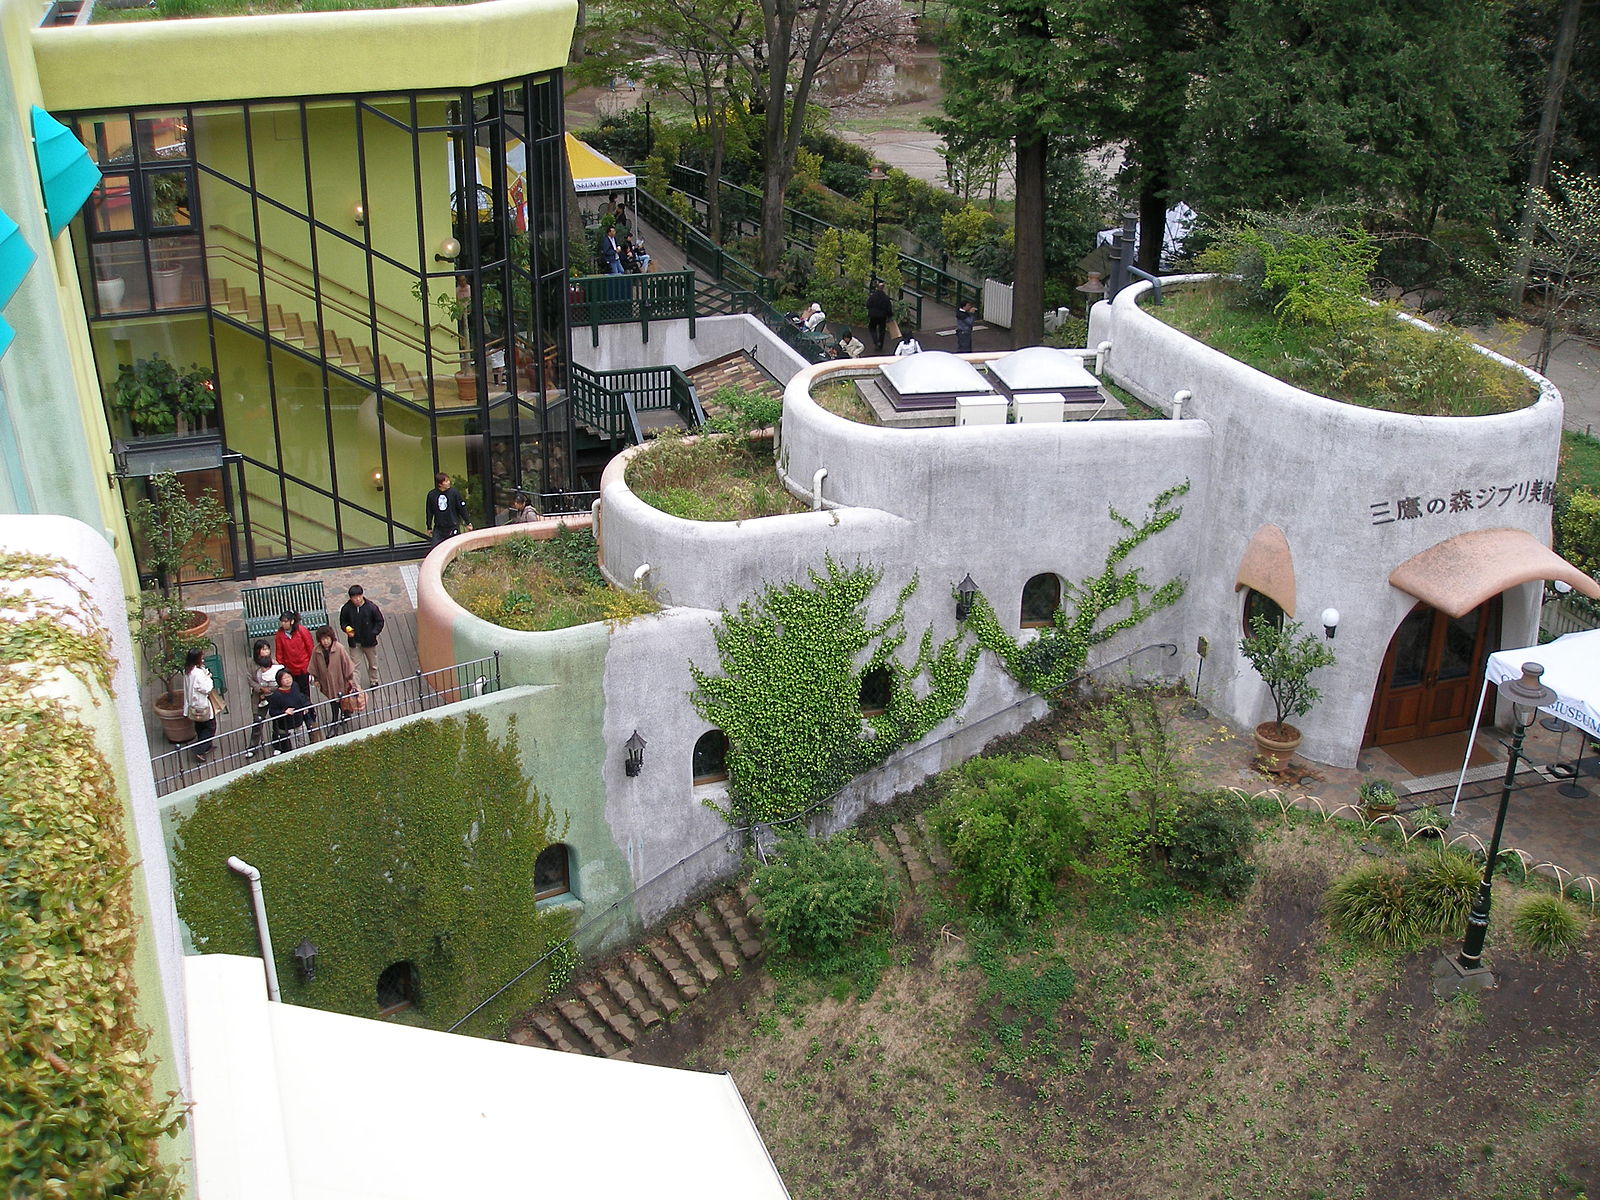 Ghibli Museum Mitaka Travel Guide: A Quick Trip From Tokyo